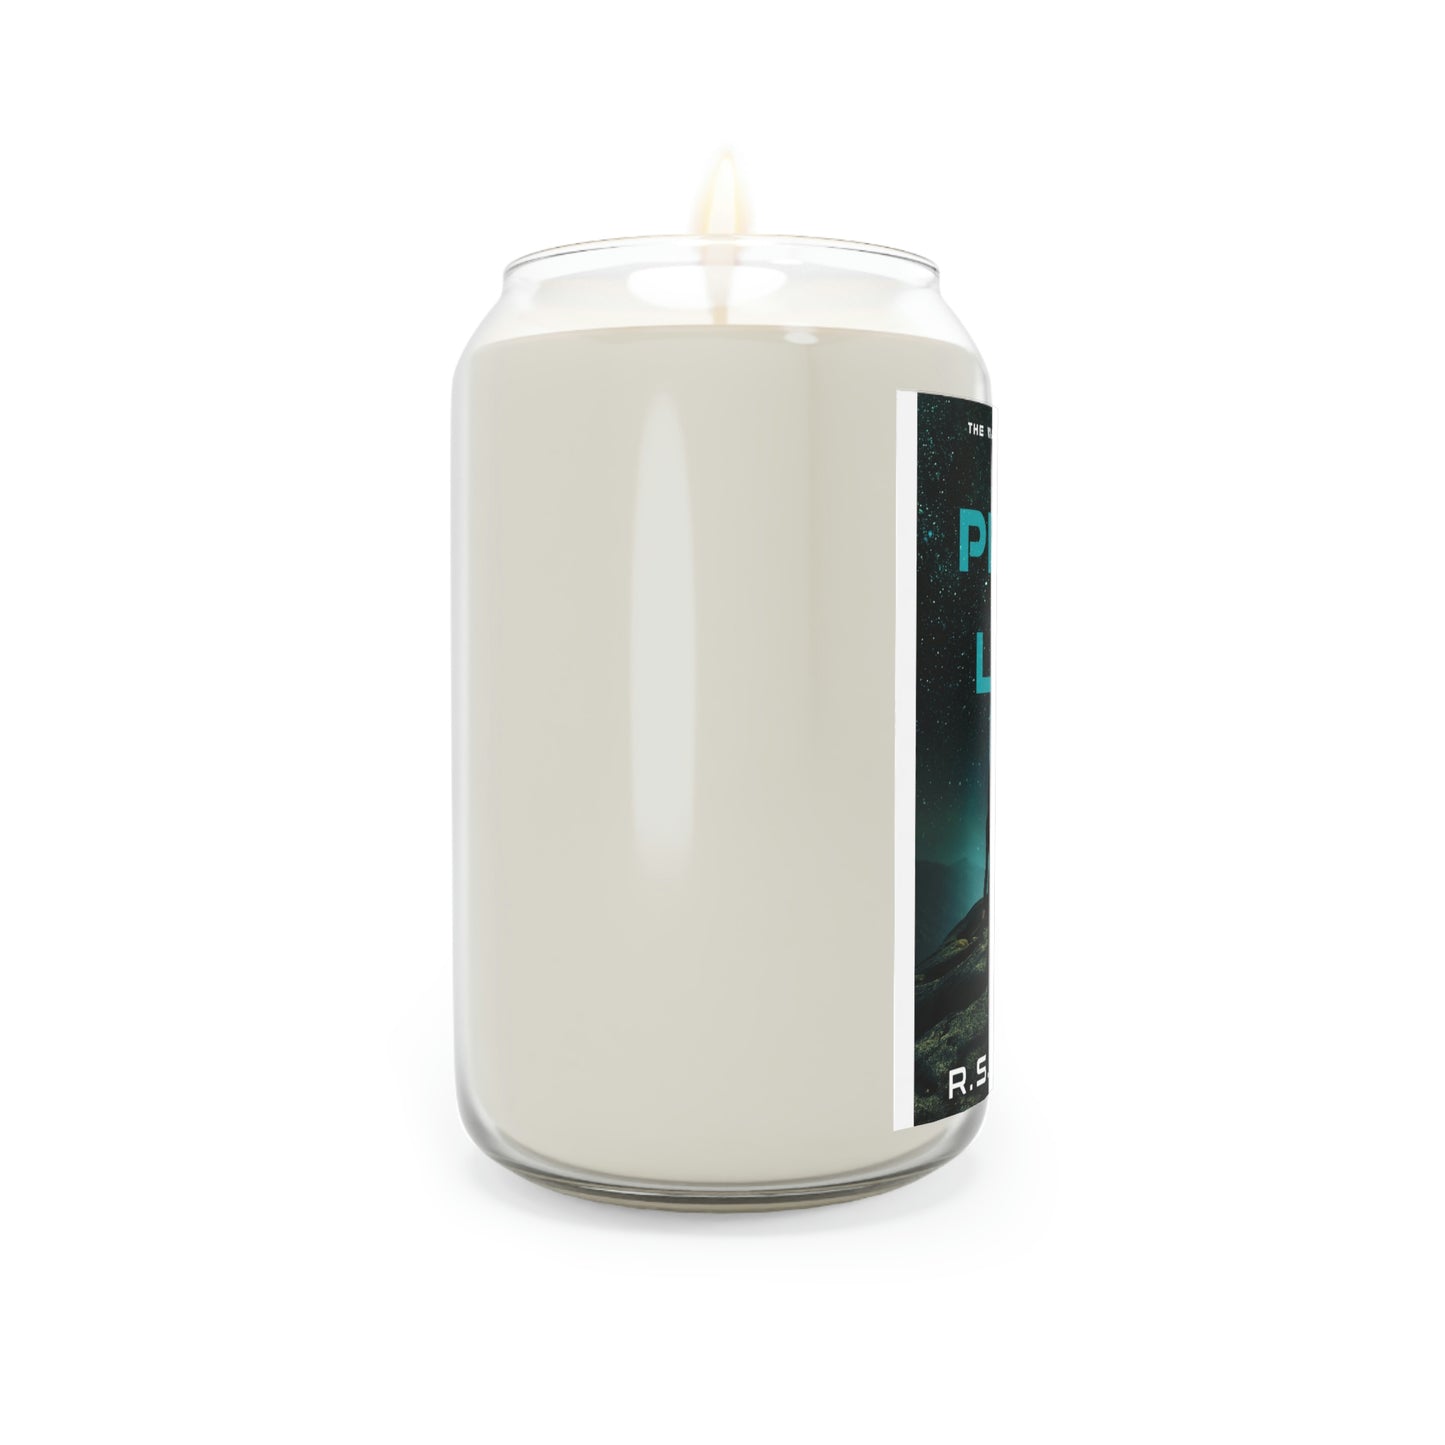 A Pillar Of Light - Scented Candle